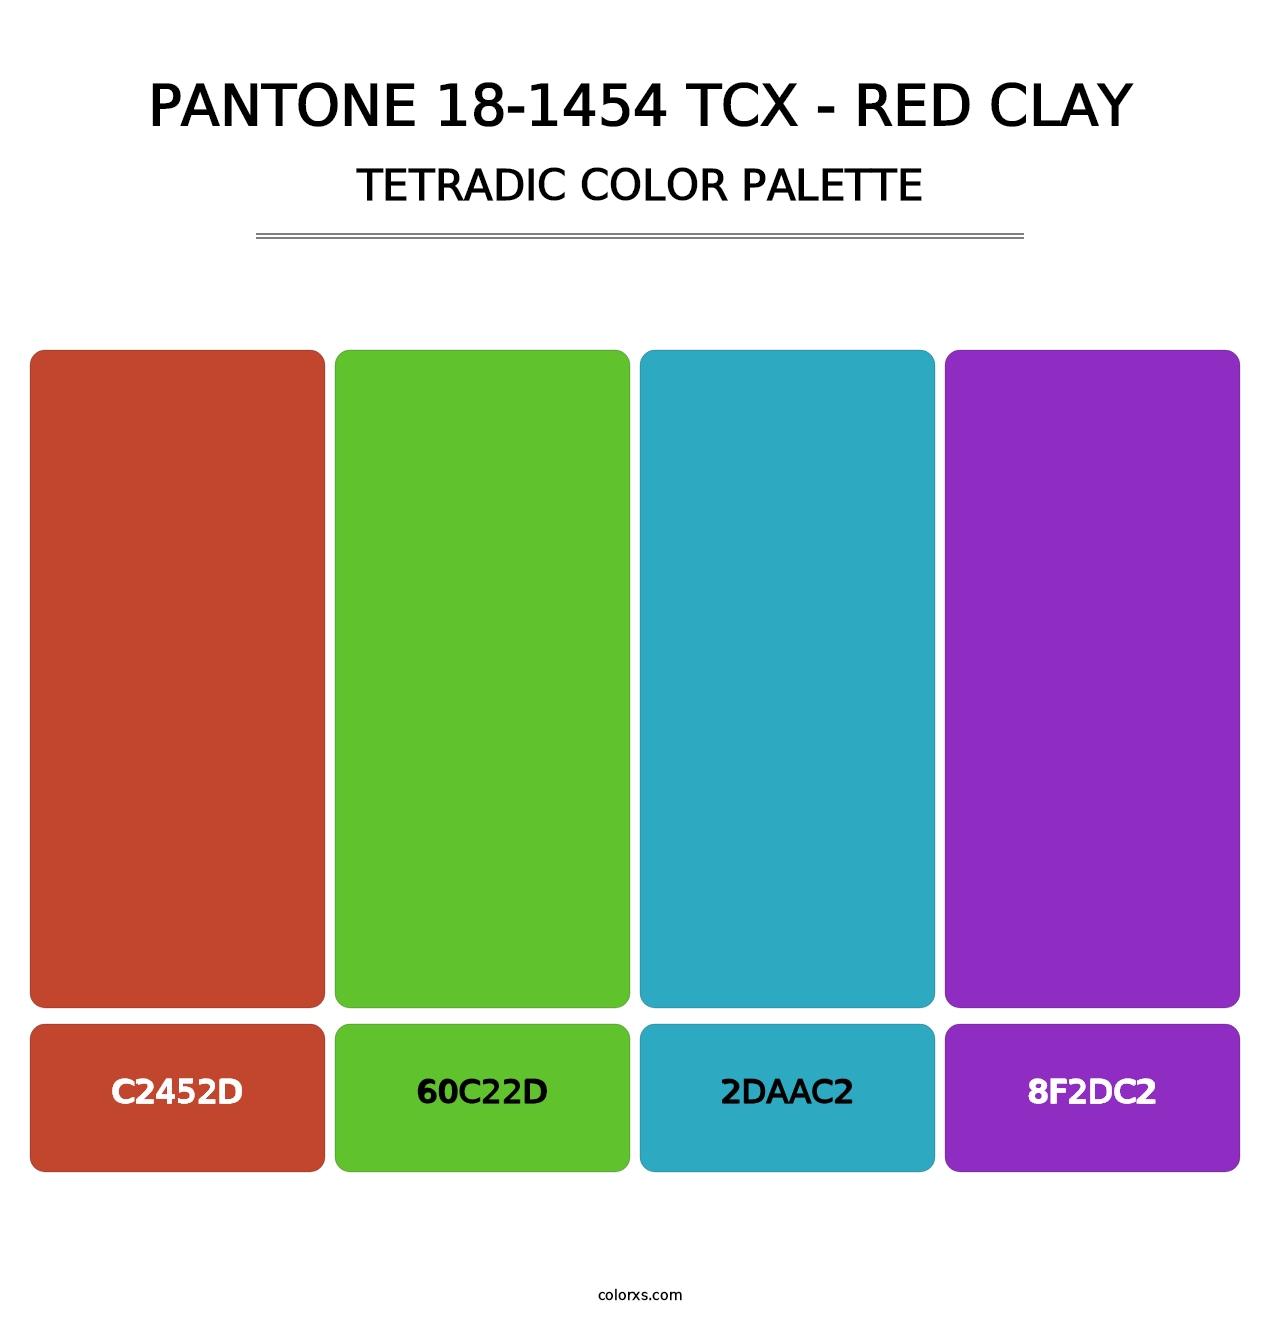 PANTONE 18-1454 TCX - Red Clay - Tetradic Color Palette